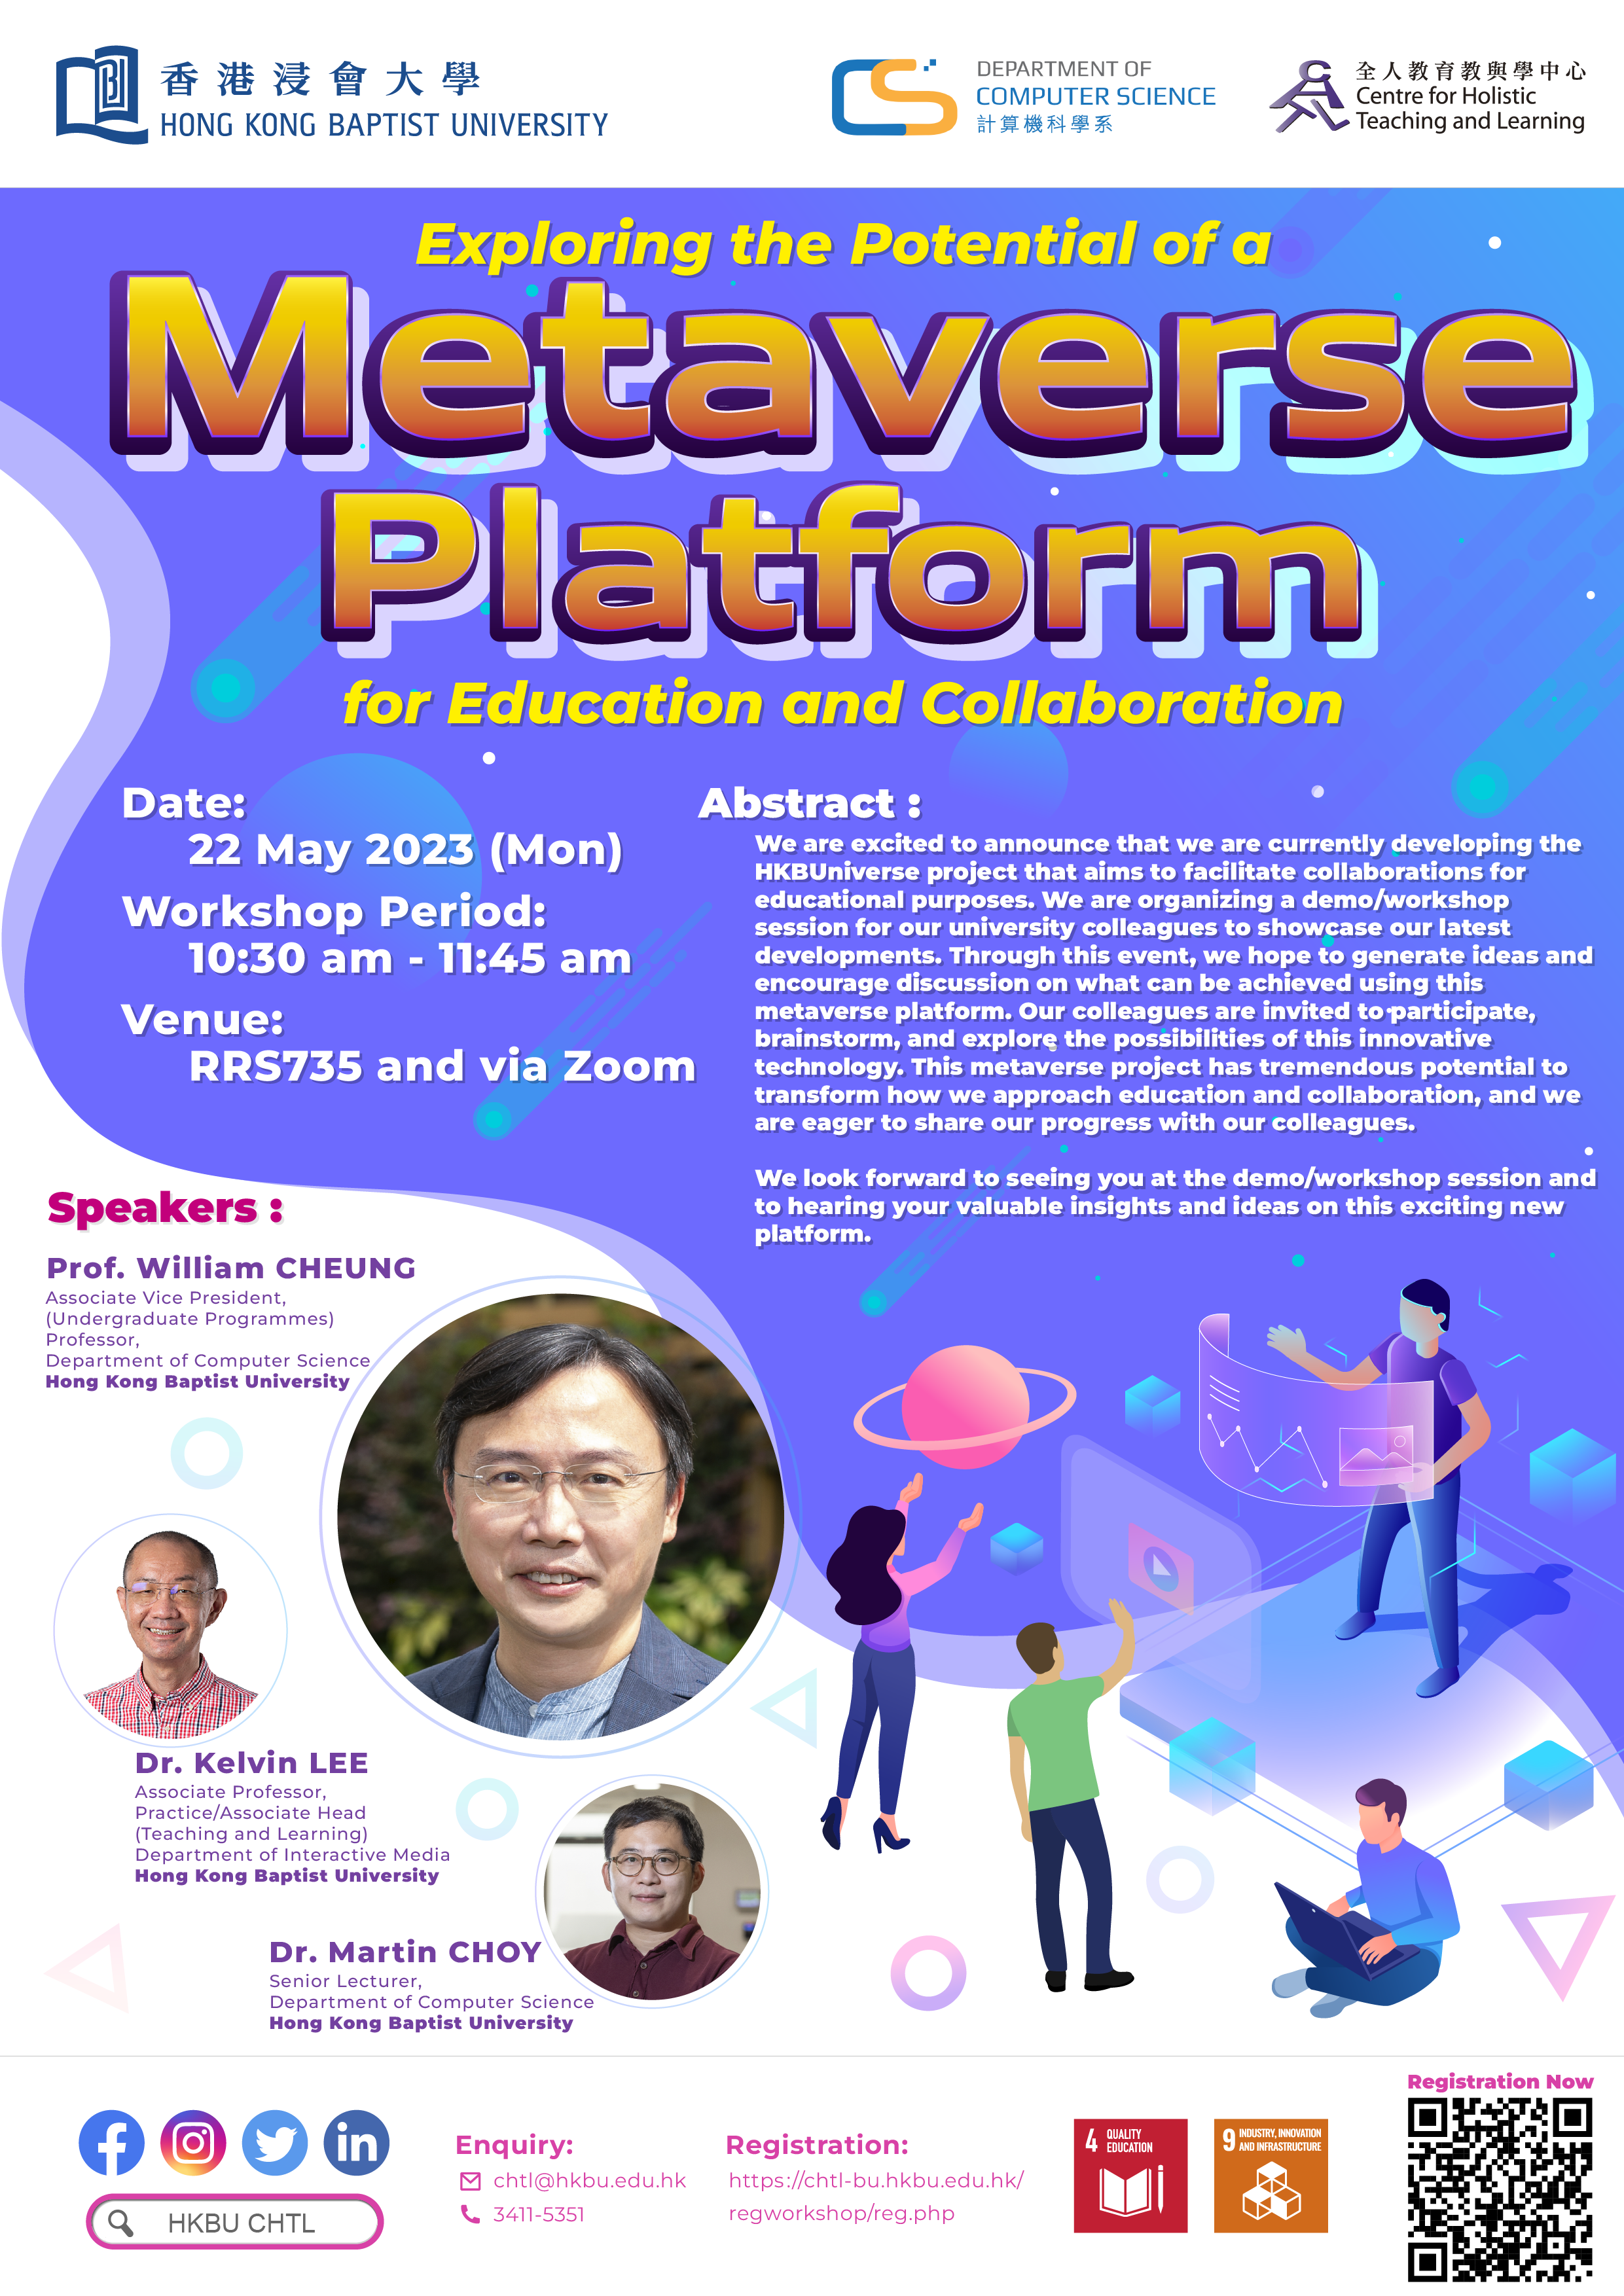 Exploring the Potential of a Metaverse Platform for Education and Collaboration